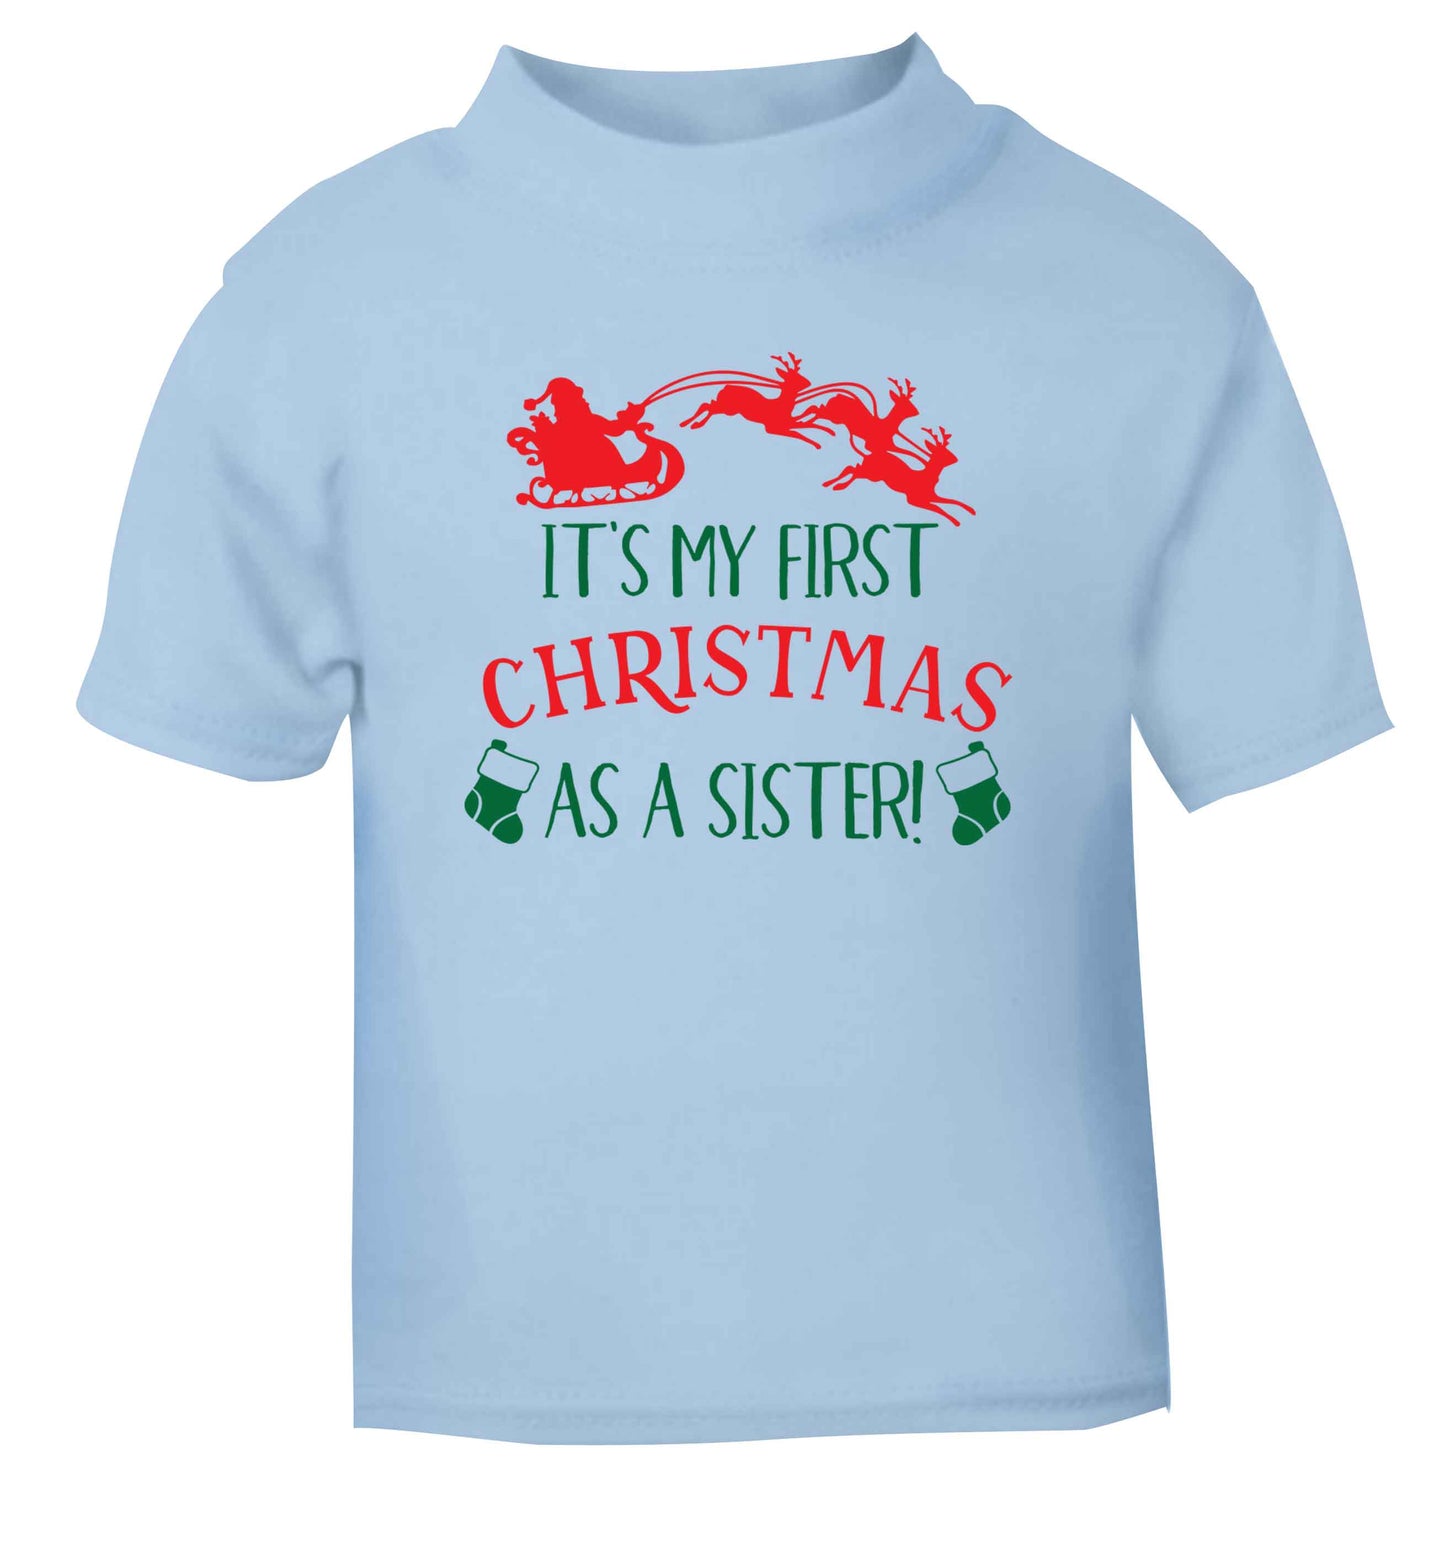 It's my first Christmas as a sister! light blue Baby Toddler Tshirt 2 Years